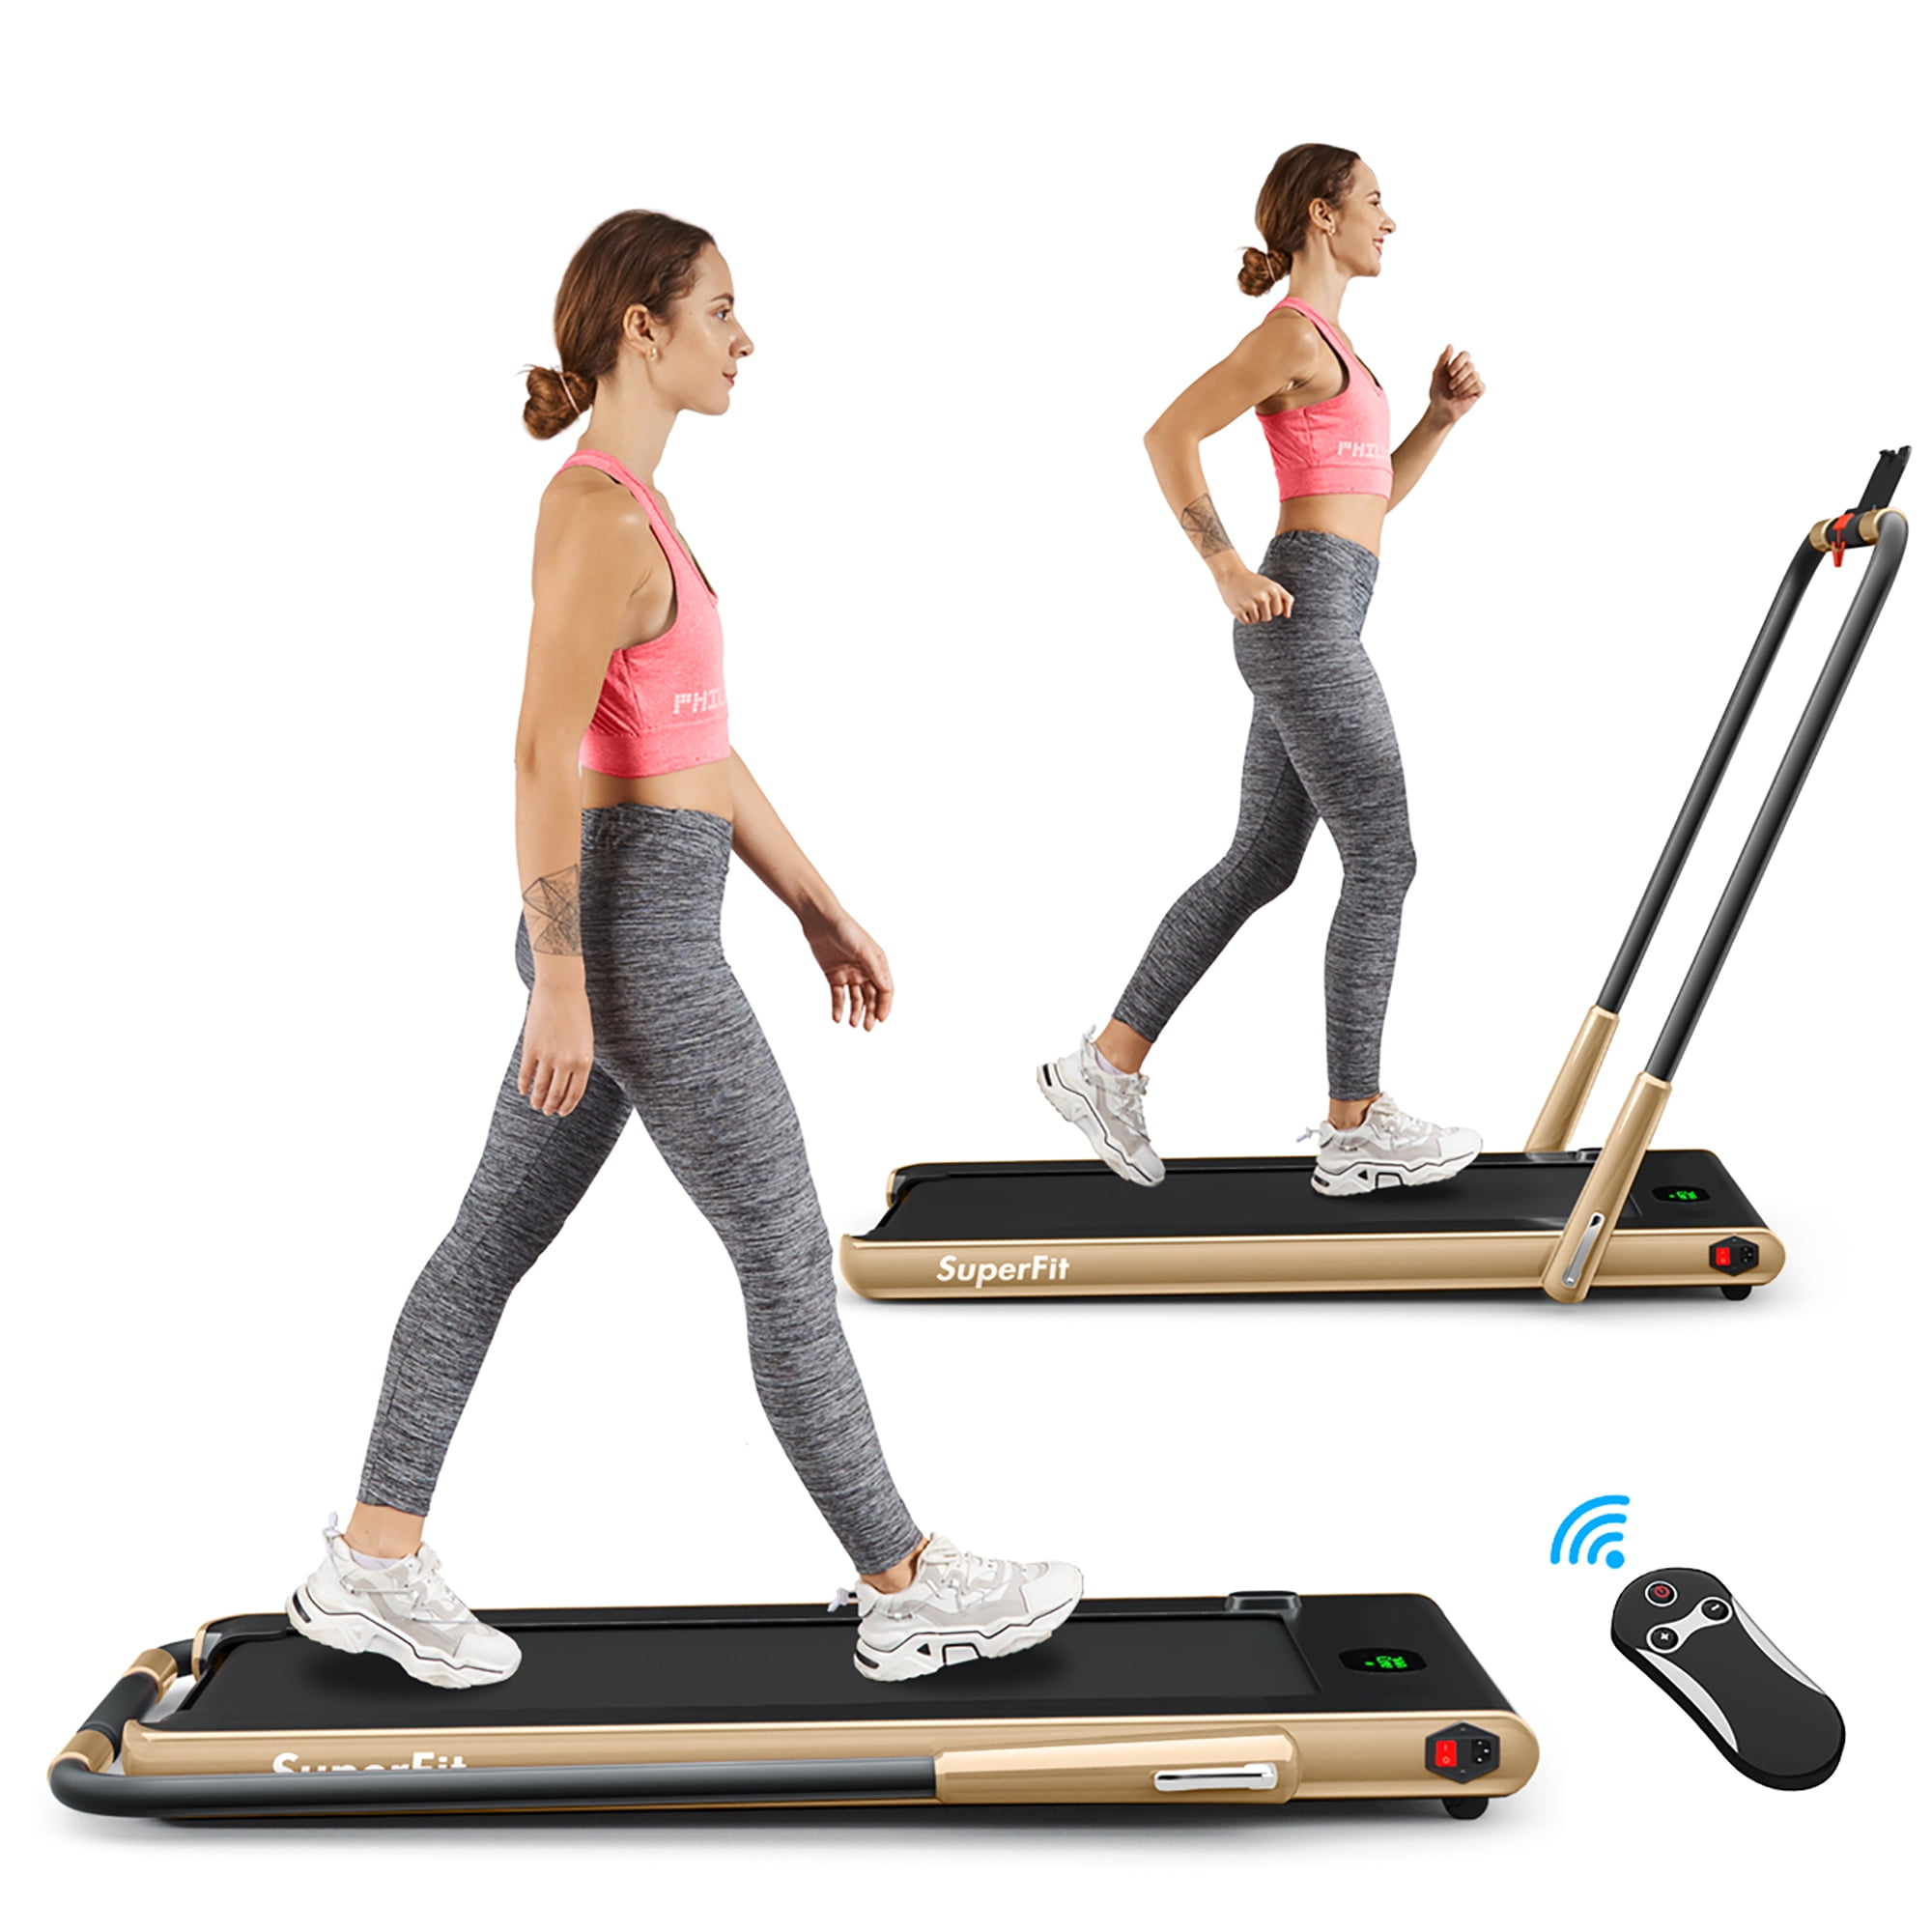 Costway SuperFit 2.25HP 2-in-1 Folding Under Desk Treadmill with Remote Control Bluetooth Speaker